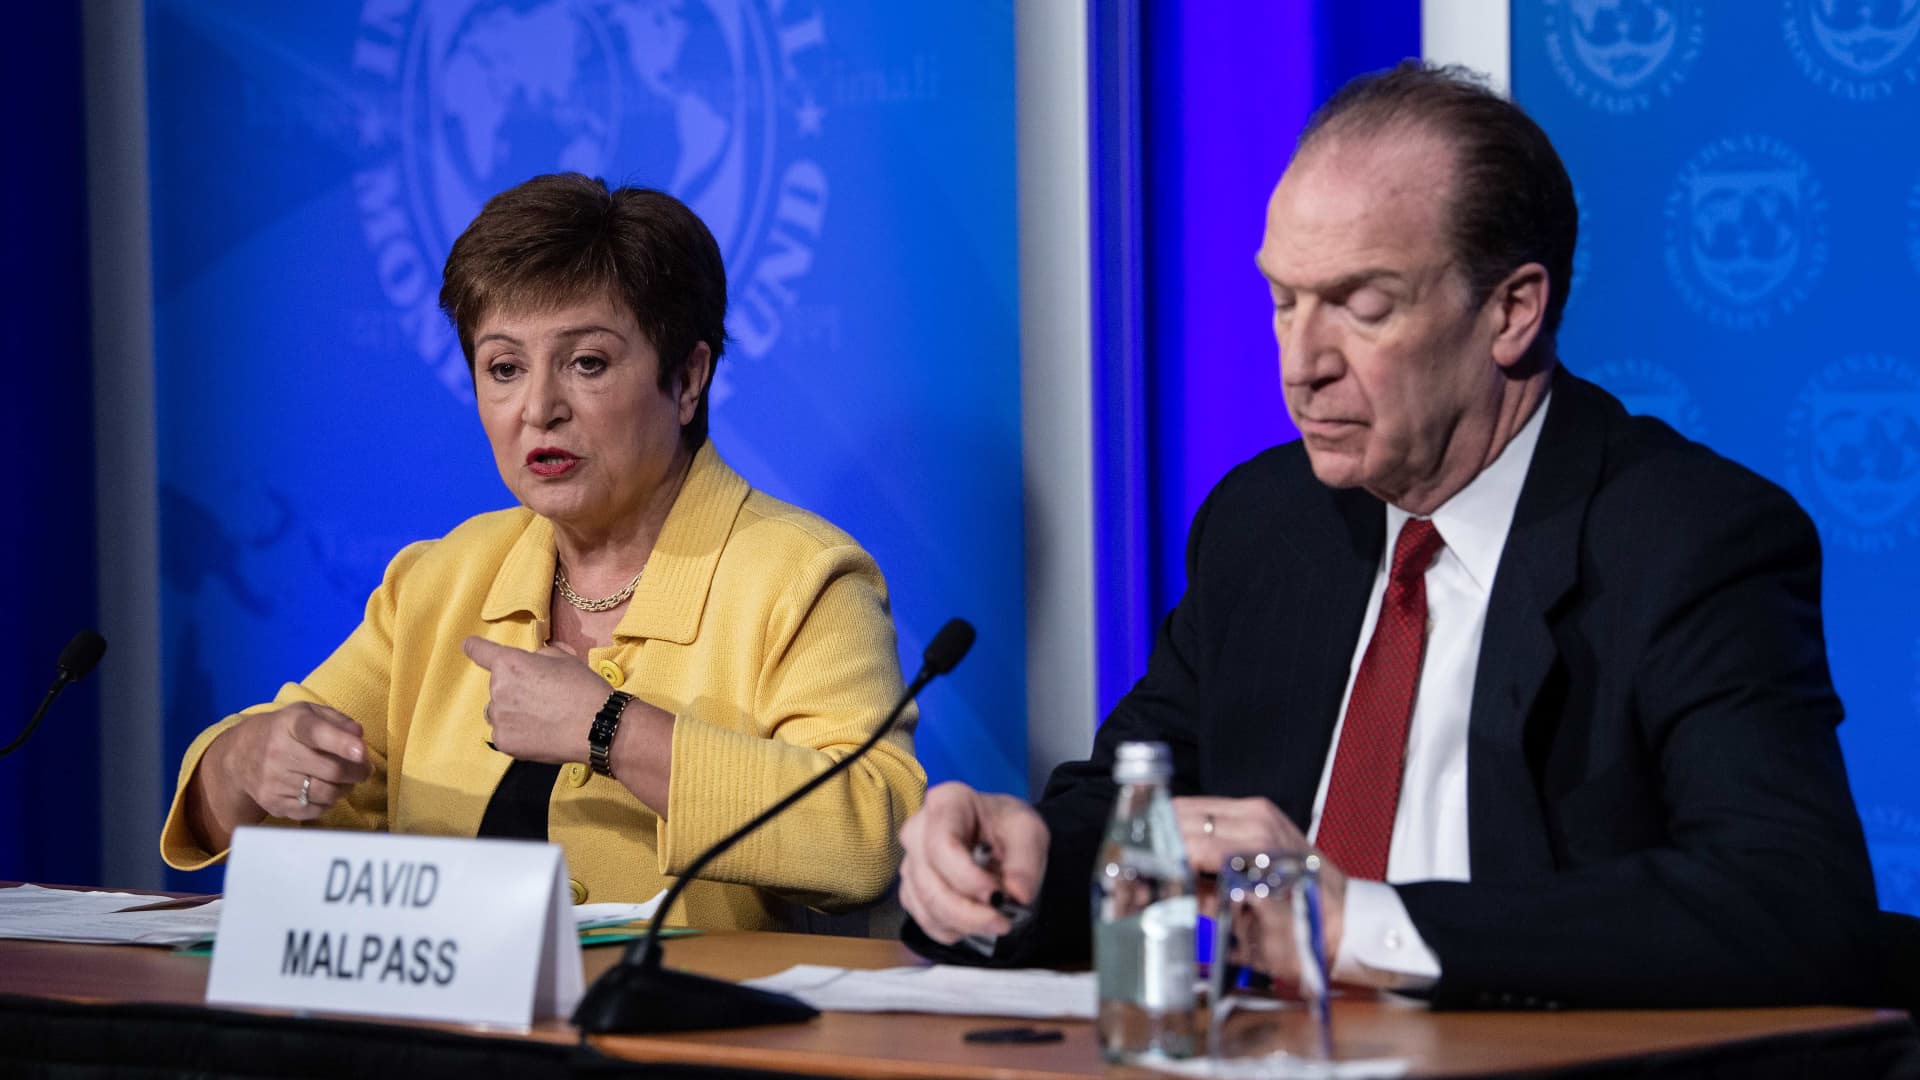 IMF Managing Director Kristalina Georgieva (L) speaks at a press briefing with World Bank Group President David Malpass on COVID-19 in Washington, DC, on March 4, 2020.